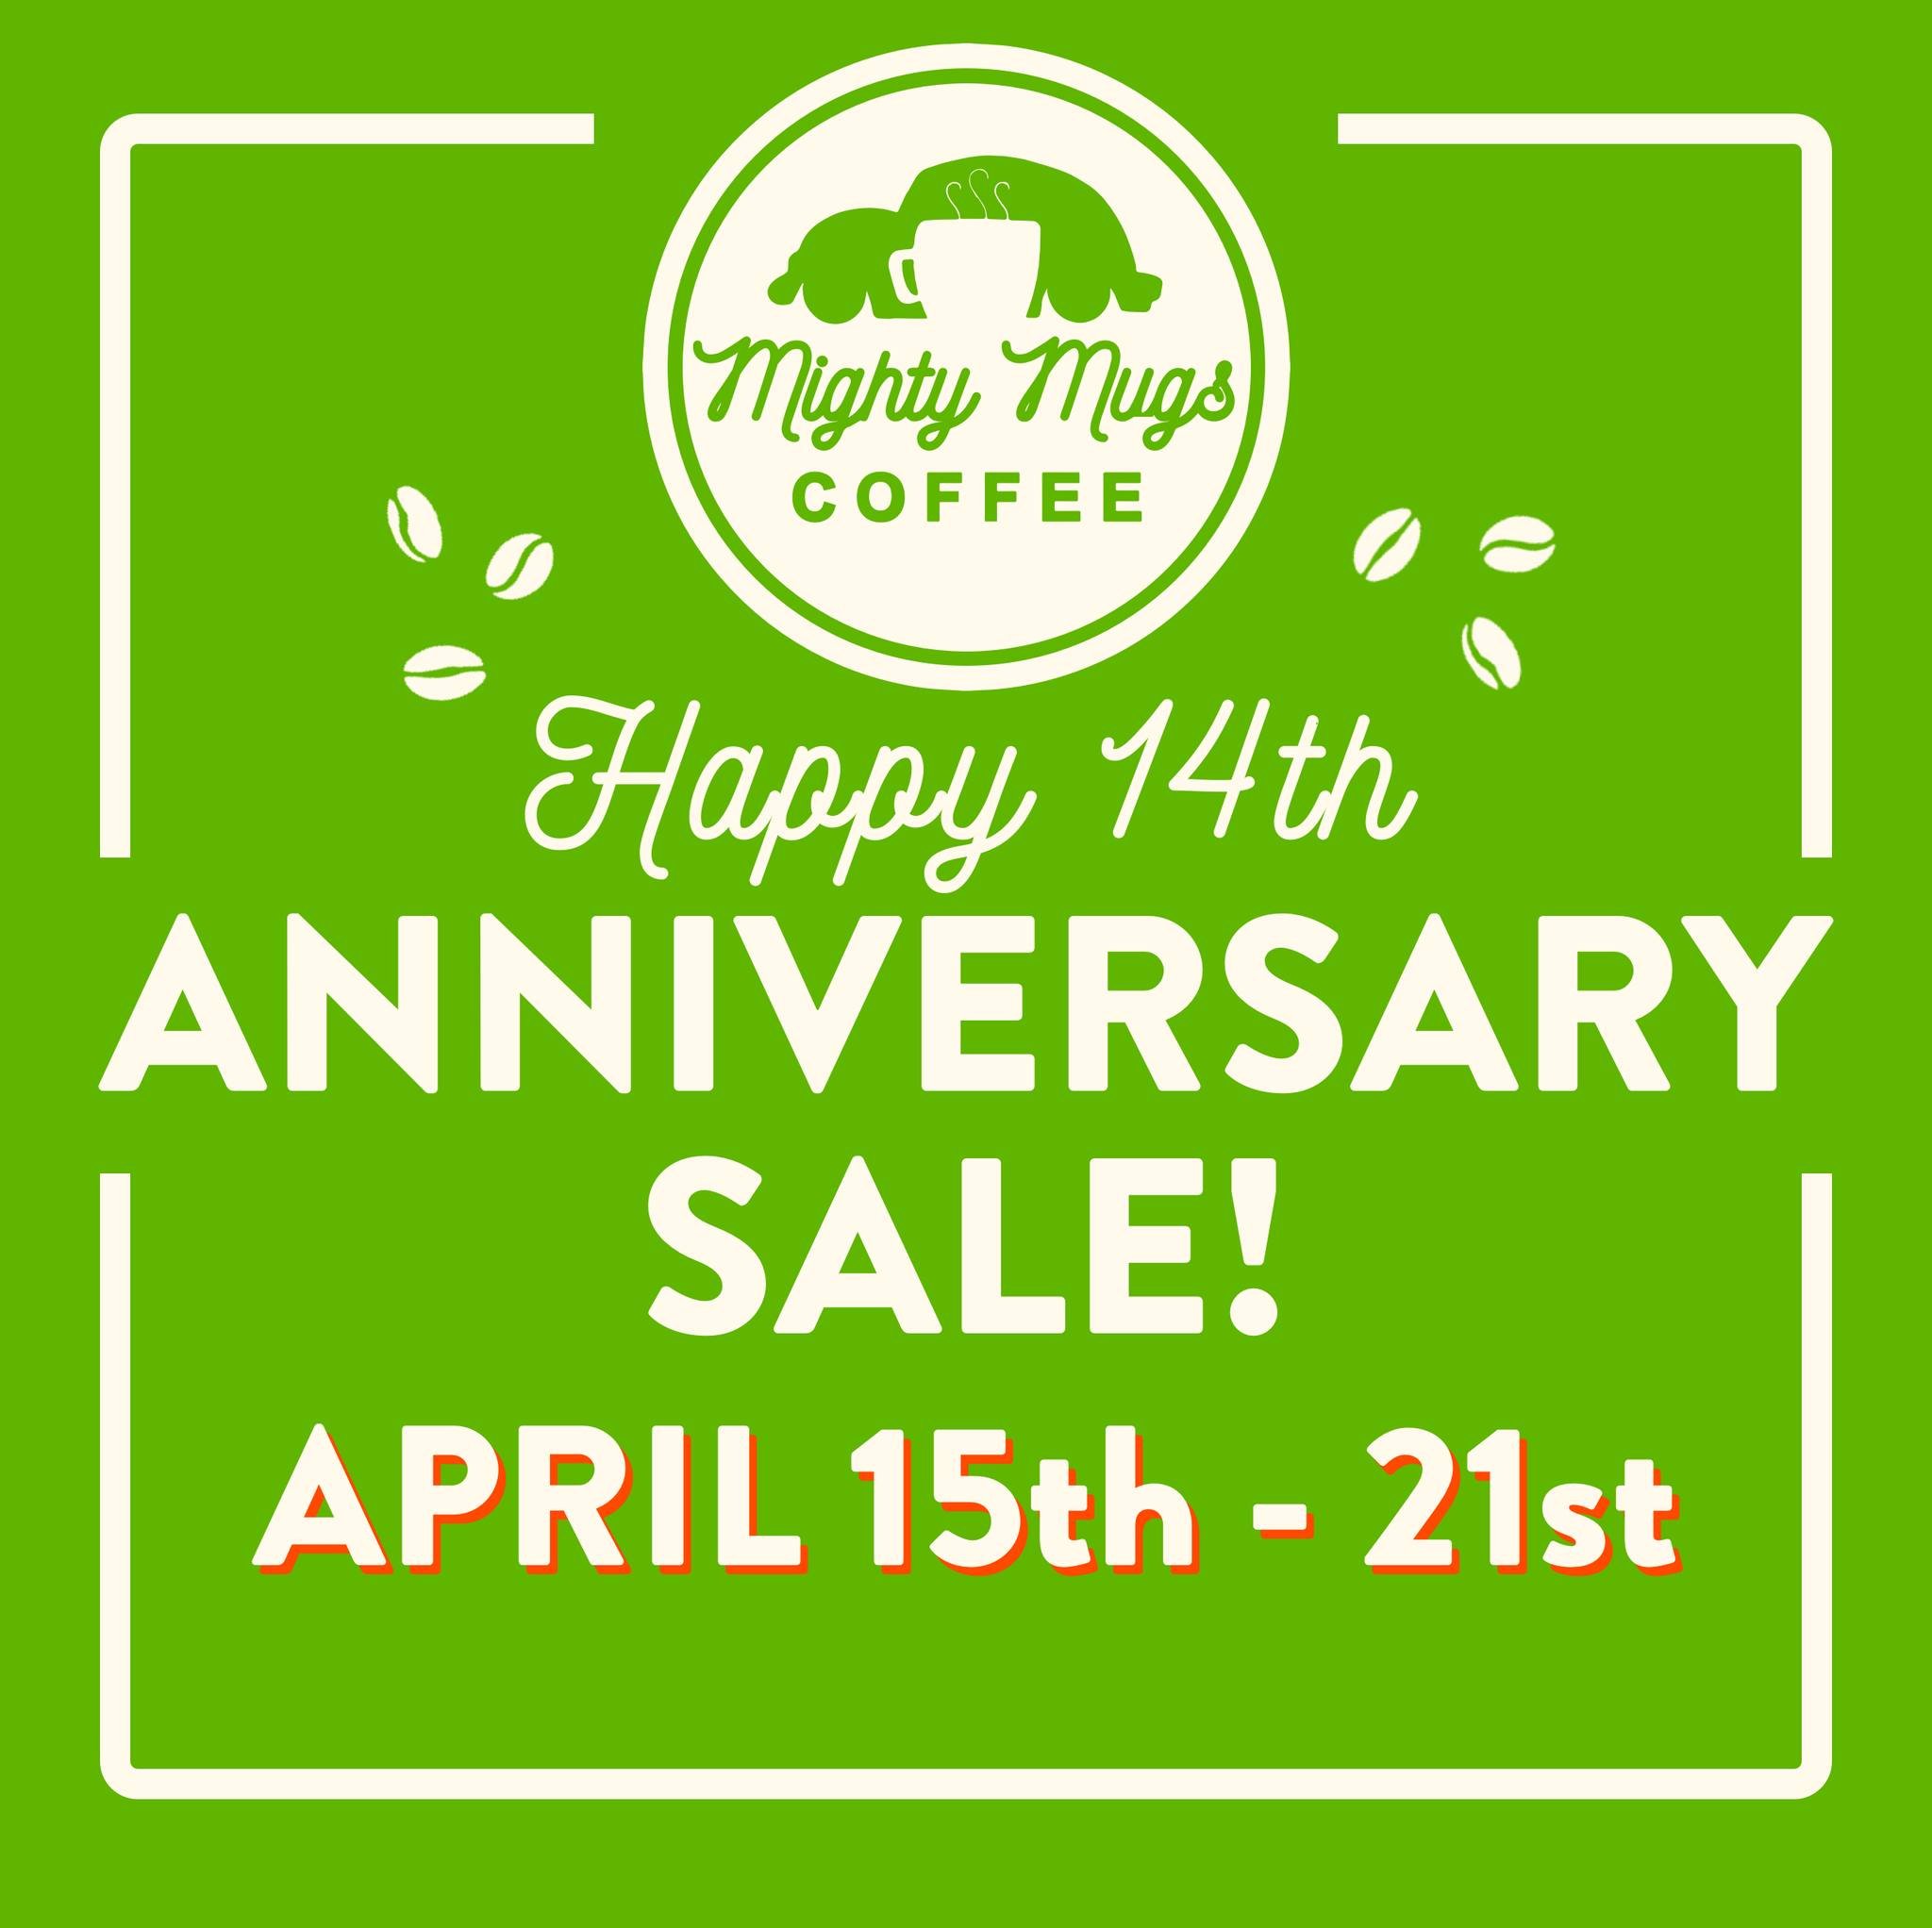 Happy 14th Anniversary to us!
Our Anniversary Sale is BACK!!! Buy $50 giftcards for just $40~
We are also doing a sale on our reusable straws and sleeves! 
Stop by one of our locations this week to stock up on coffee funds 💚